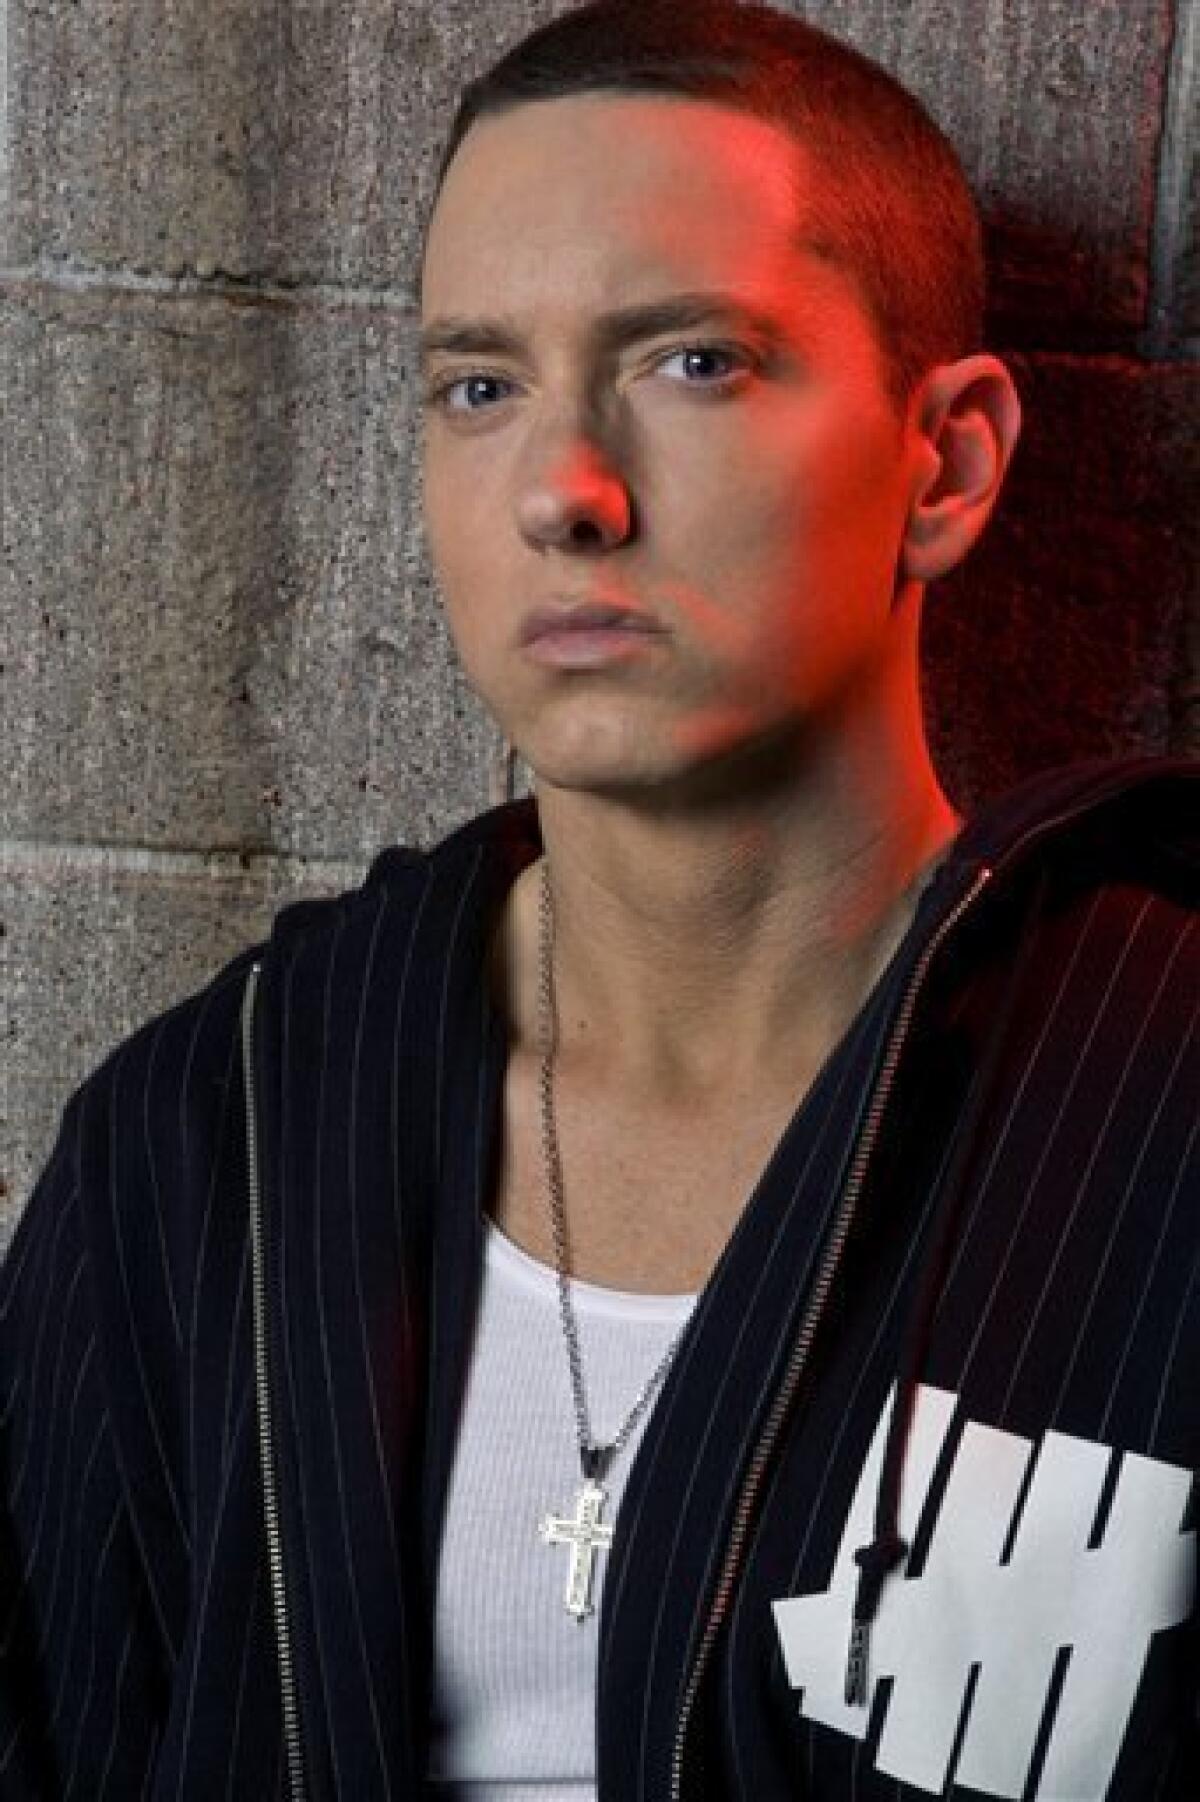 Music Review: Worth the wait? Slim Shady returns - The San Diego